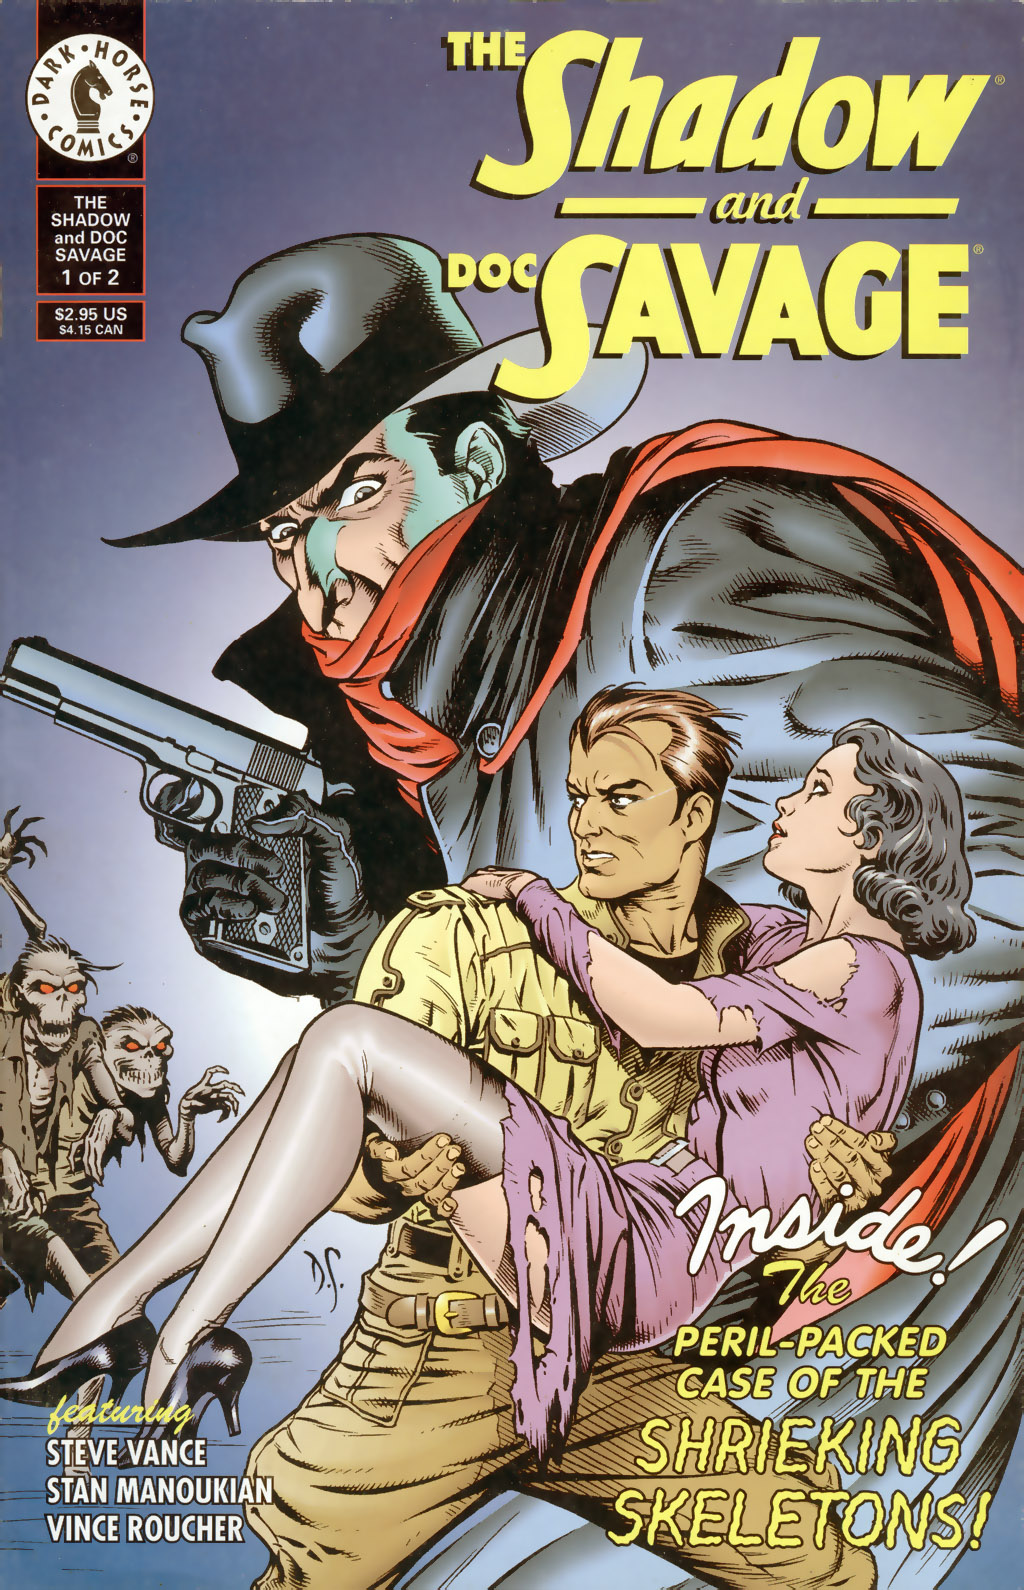 Read online The Shadow and Doc Savage comic -  Issue #1 - 1